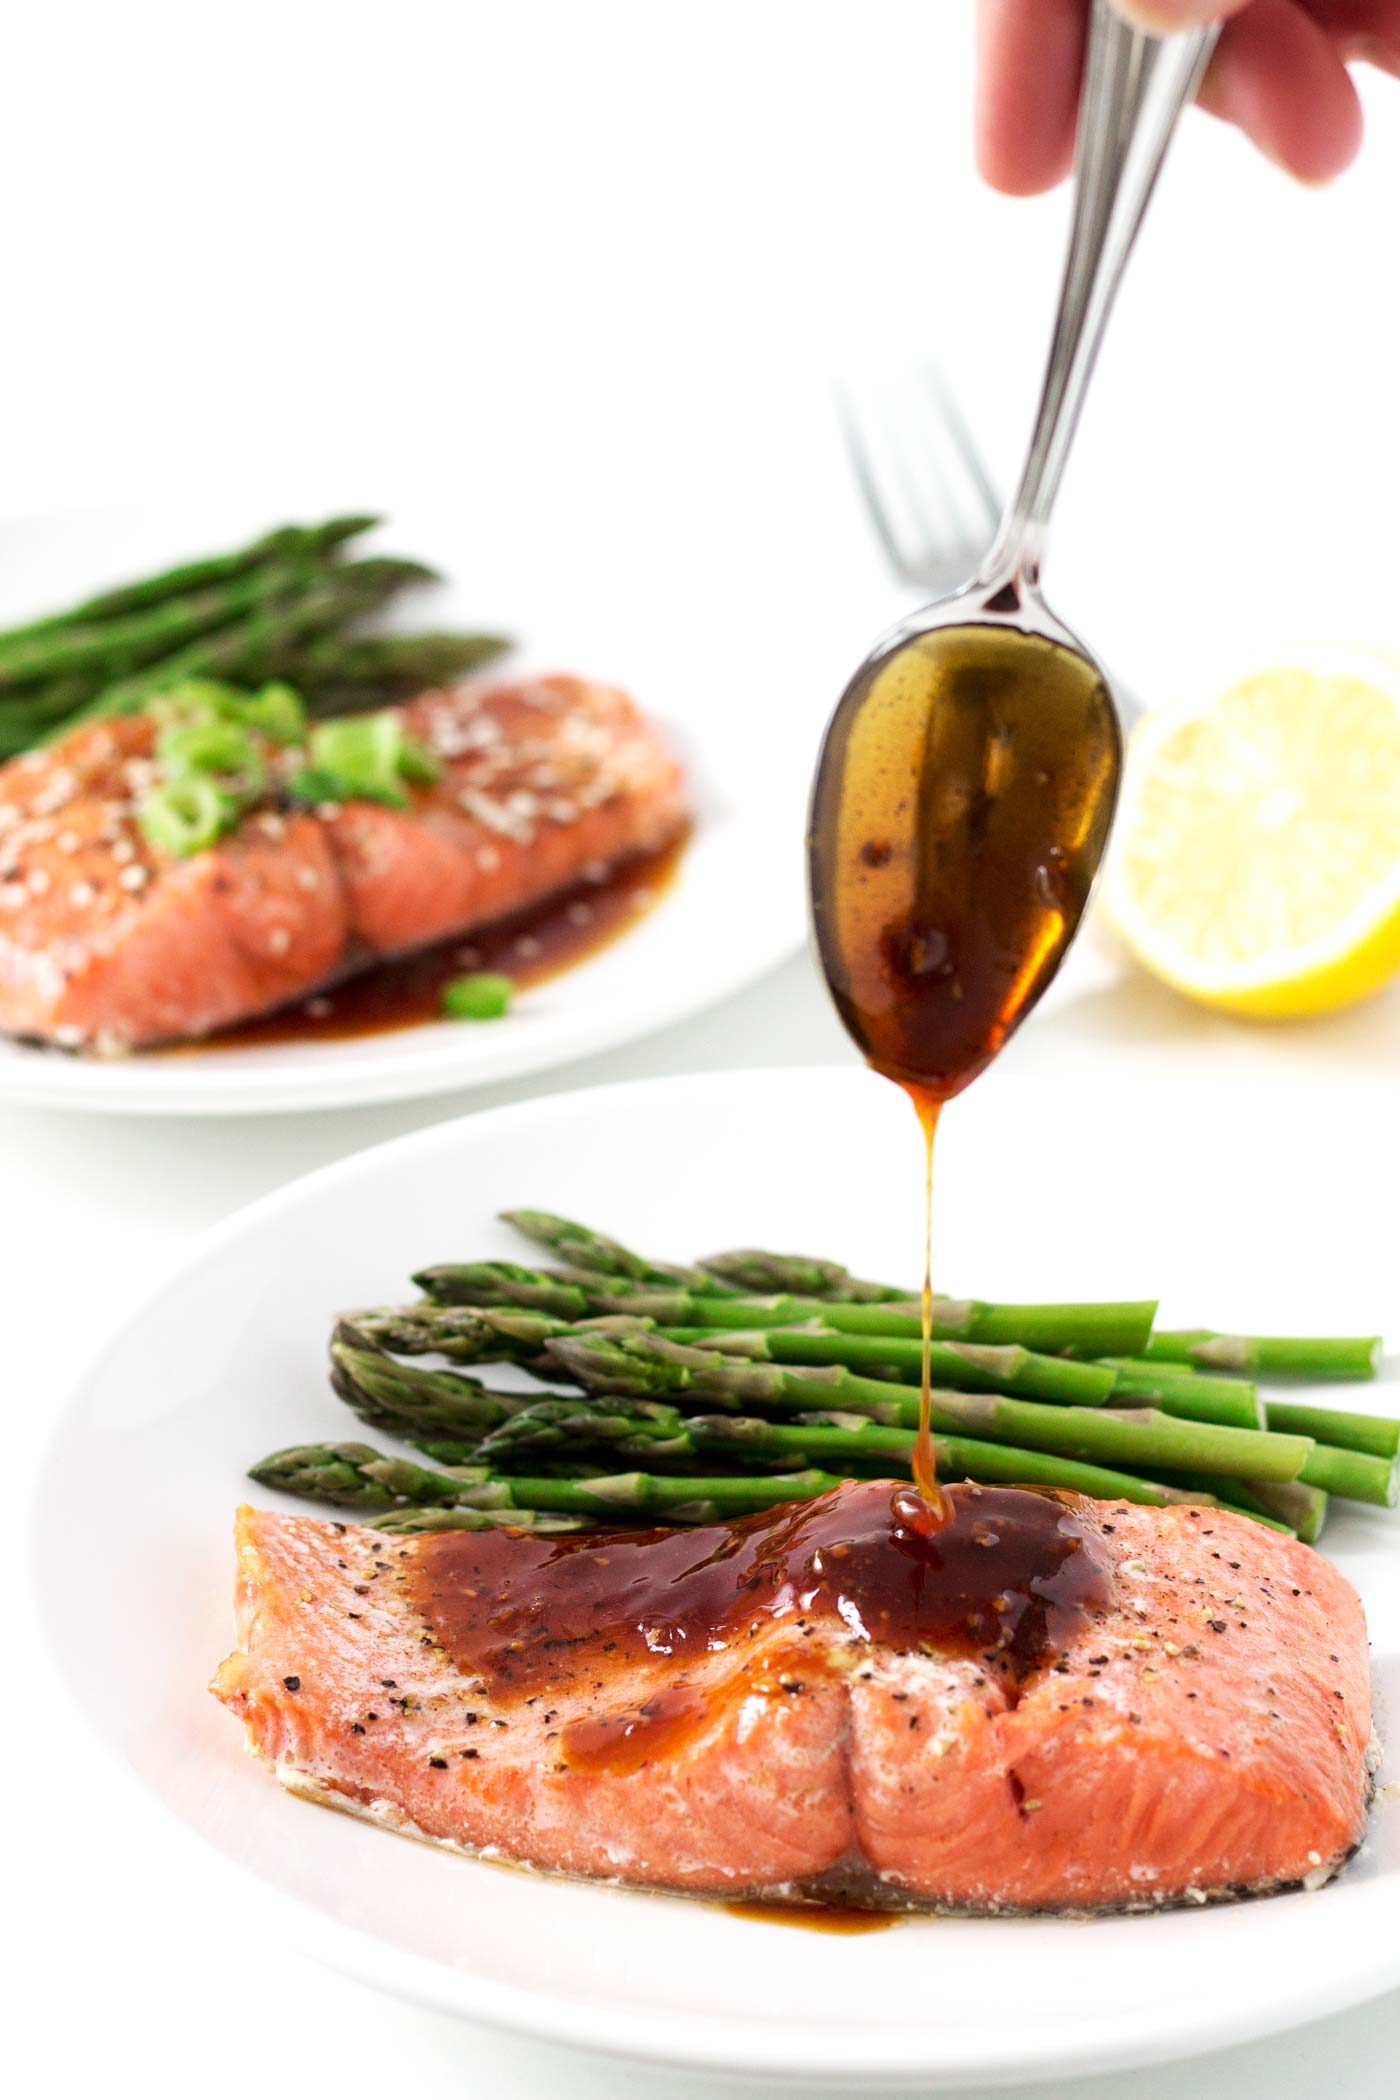 A simple and elegant weeknight meal made in just 25 mins! This honey garlic glazed salmon is full of flavor, gluten free, dairy free, and paleo!